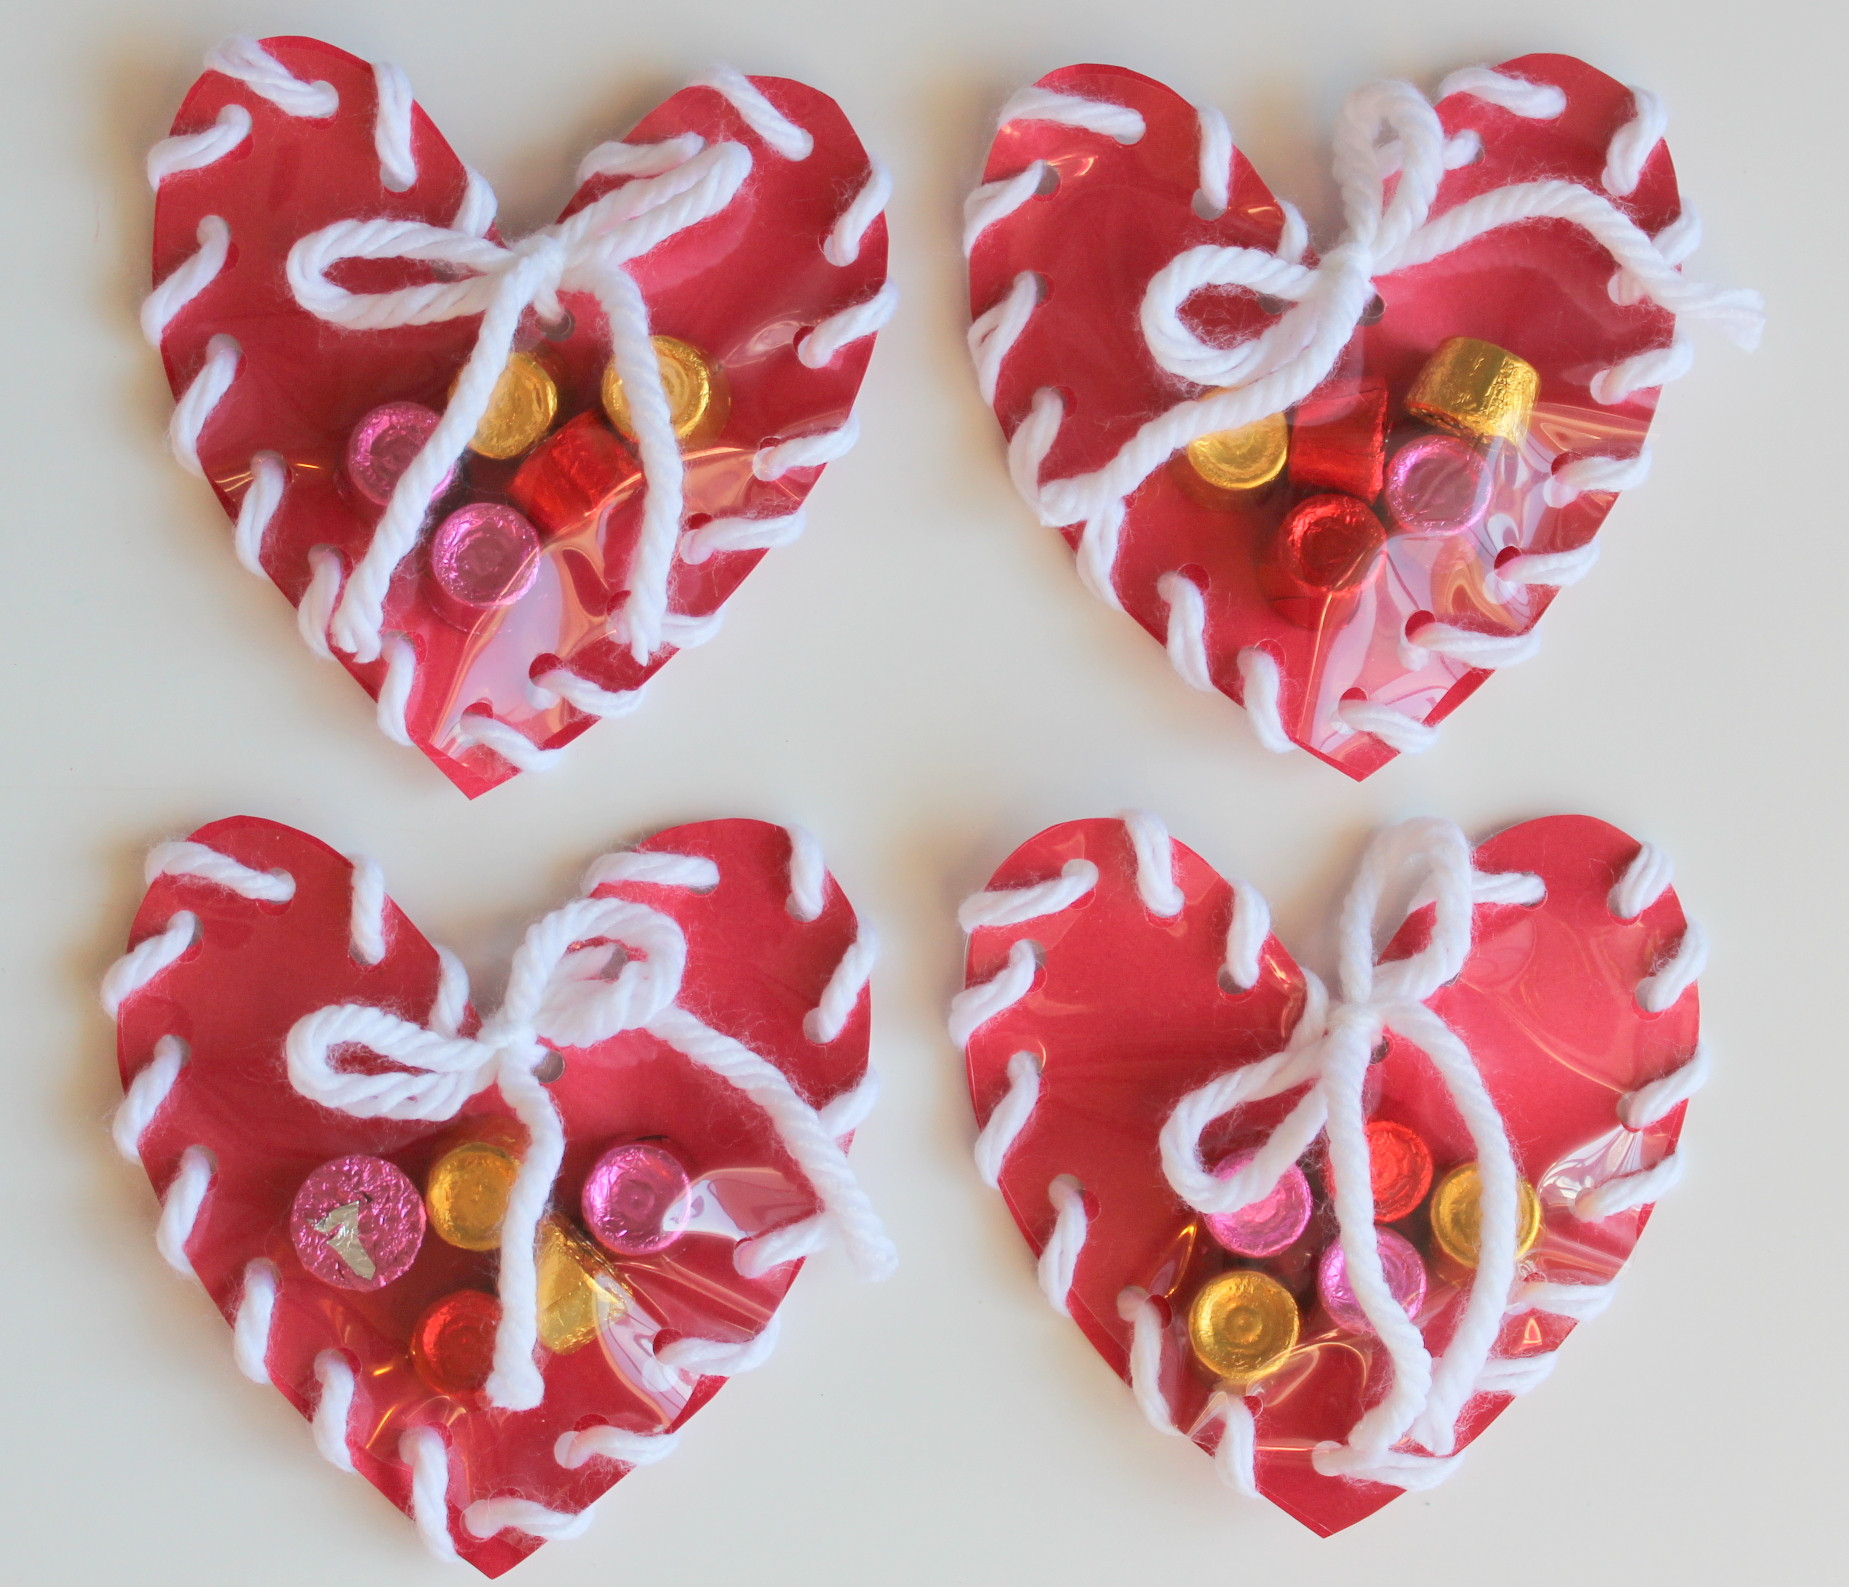 Valentines Crafts For Kids
 Lollydot Hand Sewn Paper Heart Valentine Craft for Kids